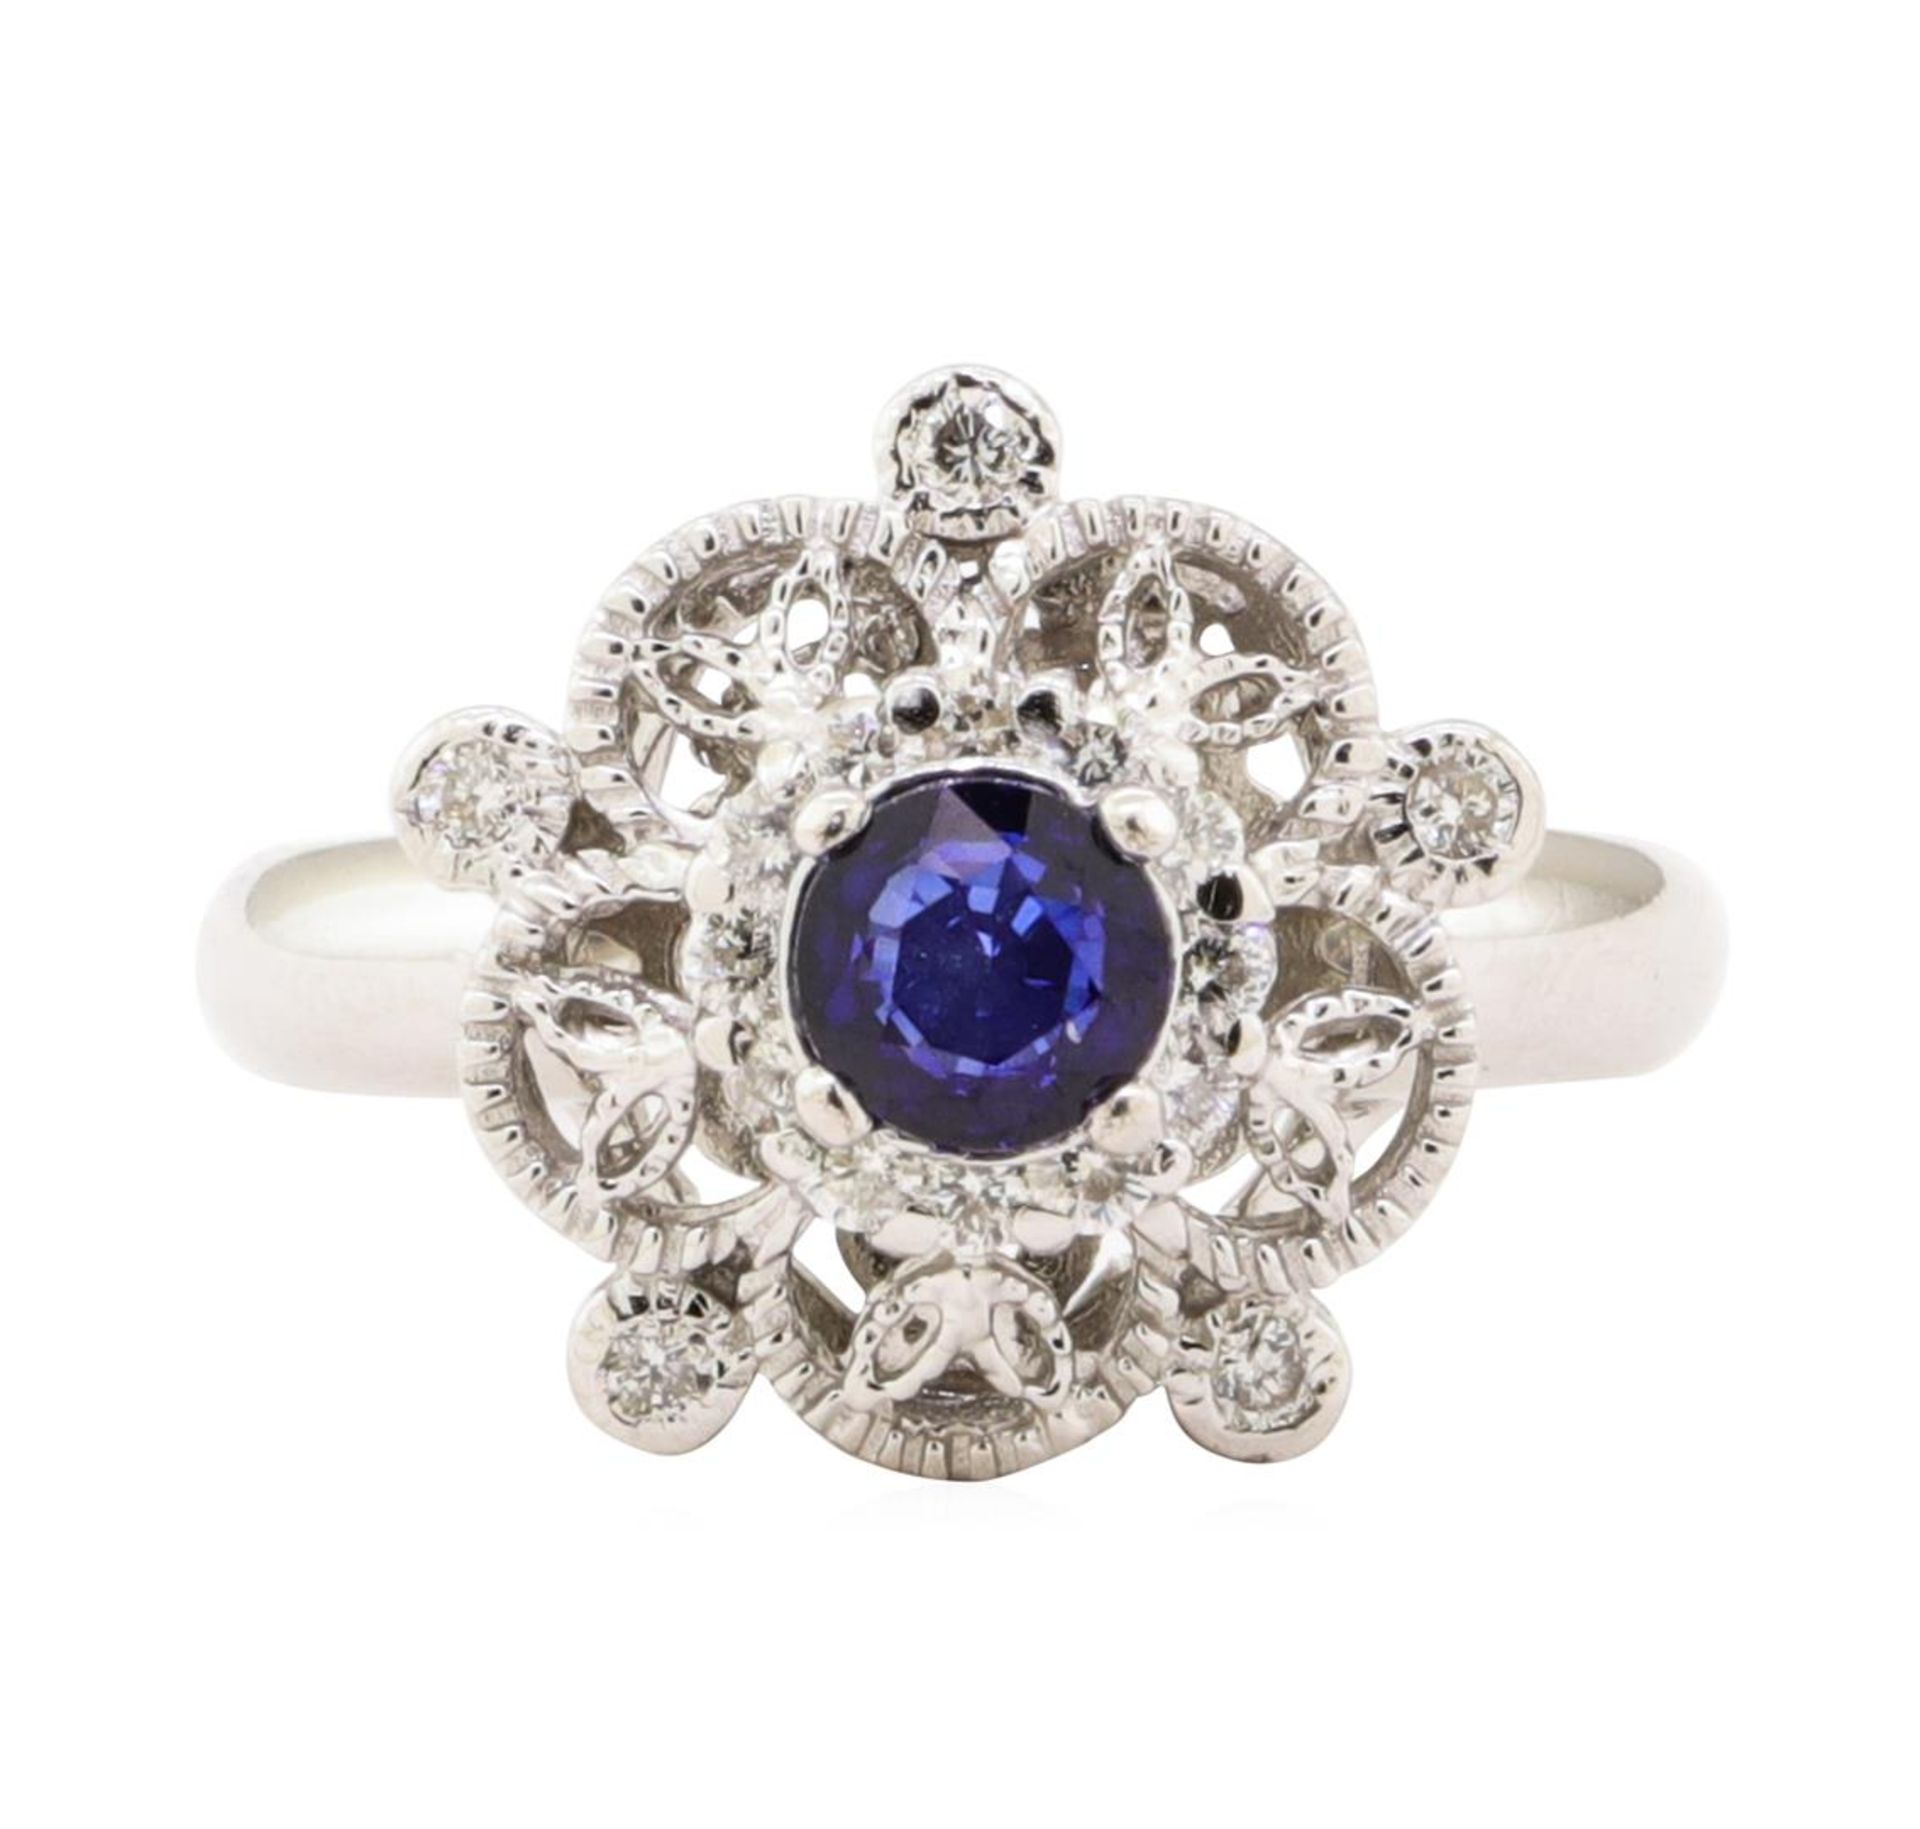 0.88 ctw Blue Sapphire And Diamond Ring - 14KT White Gold - Image 2 of 5